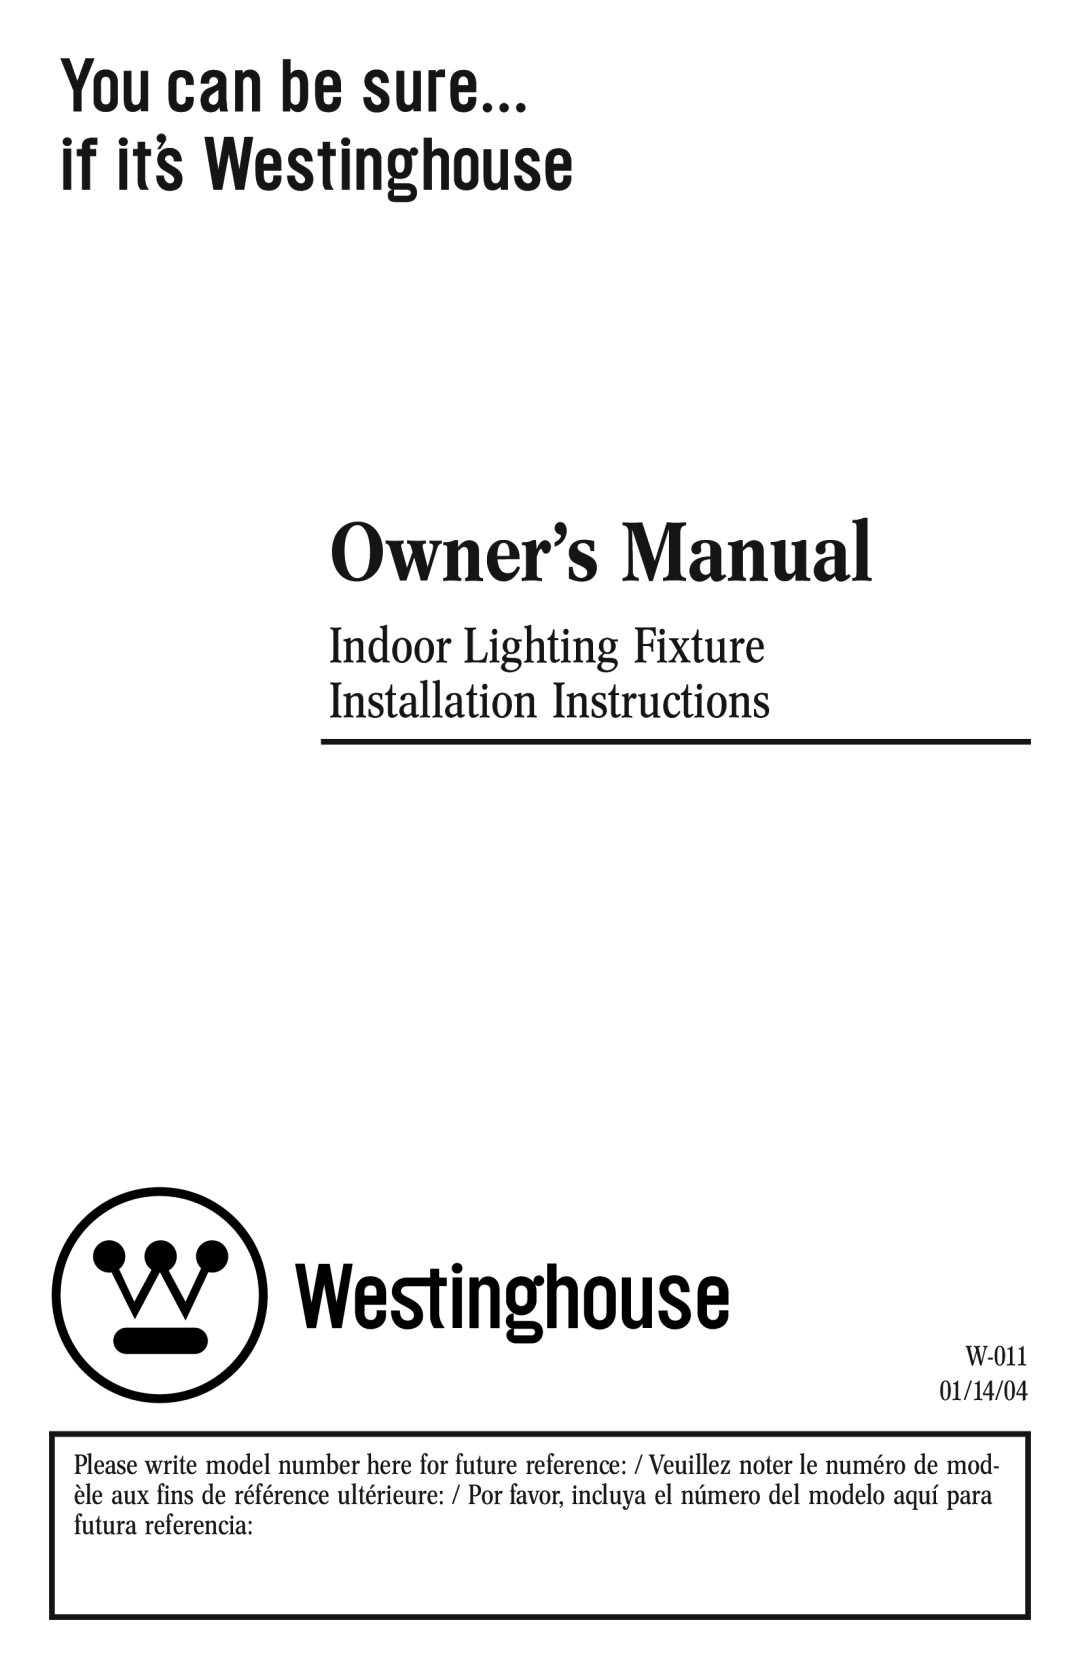 Westinghouse 1/14/04 owner manual Indoor Lighting Fixture Installation Instructions 